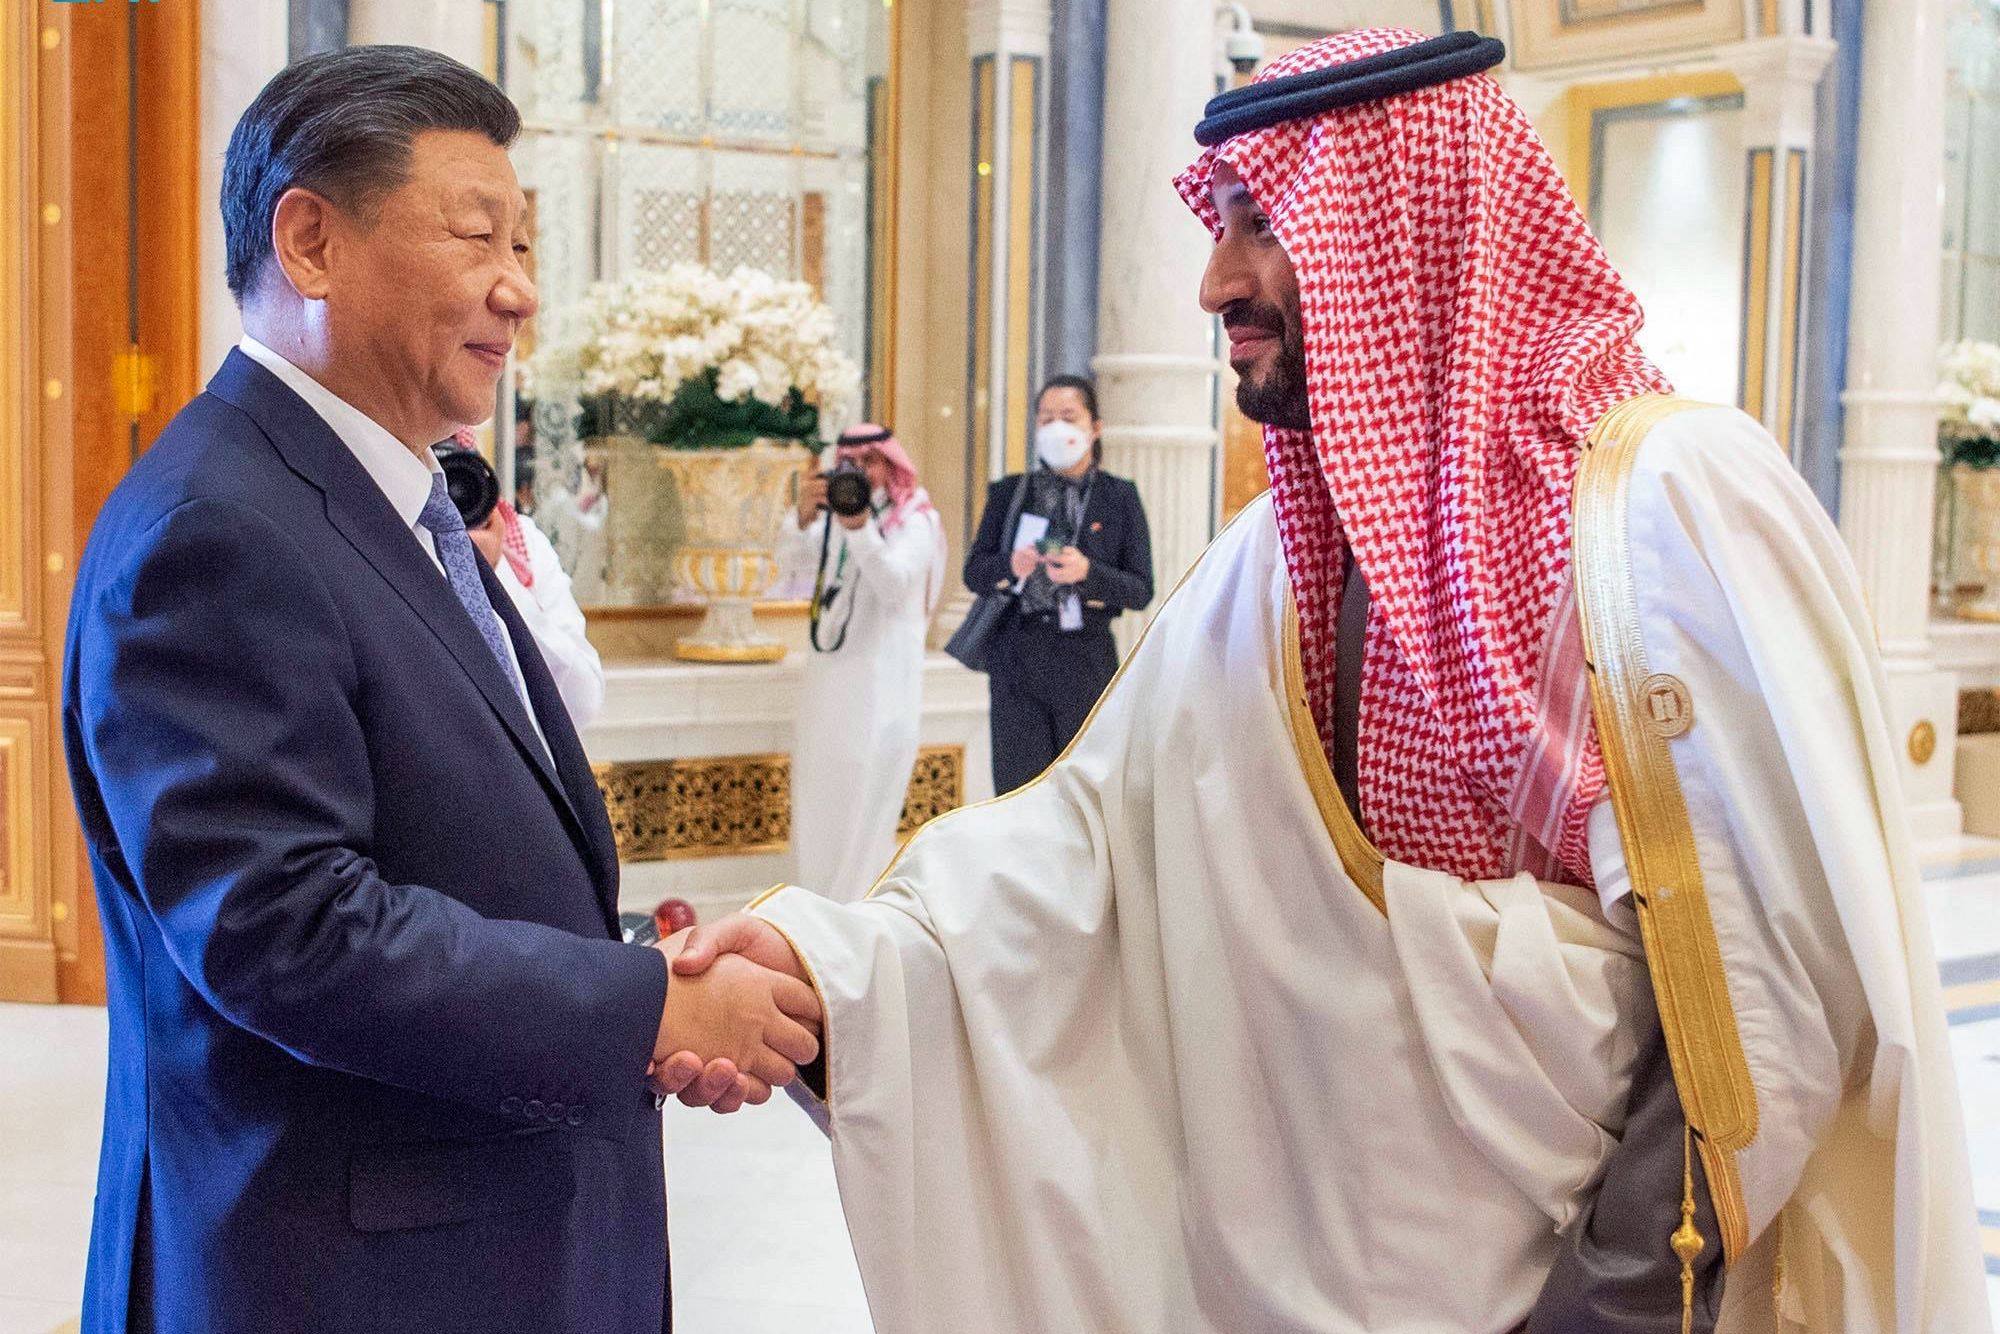  Saudi Crown Prince Mohammed bin Salman (R) shaking hands with Chinese President Xi Jinping during the China-Arab Summit in the Saudi capital Riyadh, on December 9. Photo: Handout/ SPA/AFP